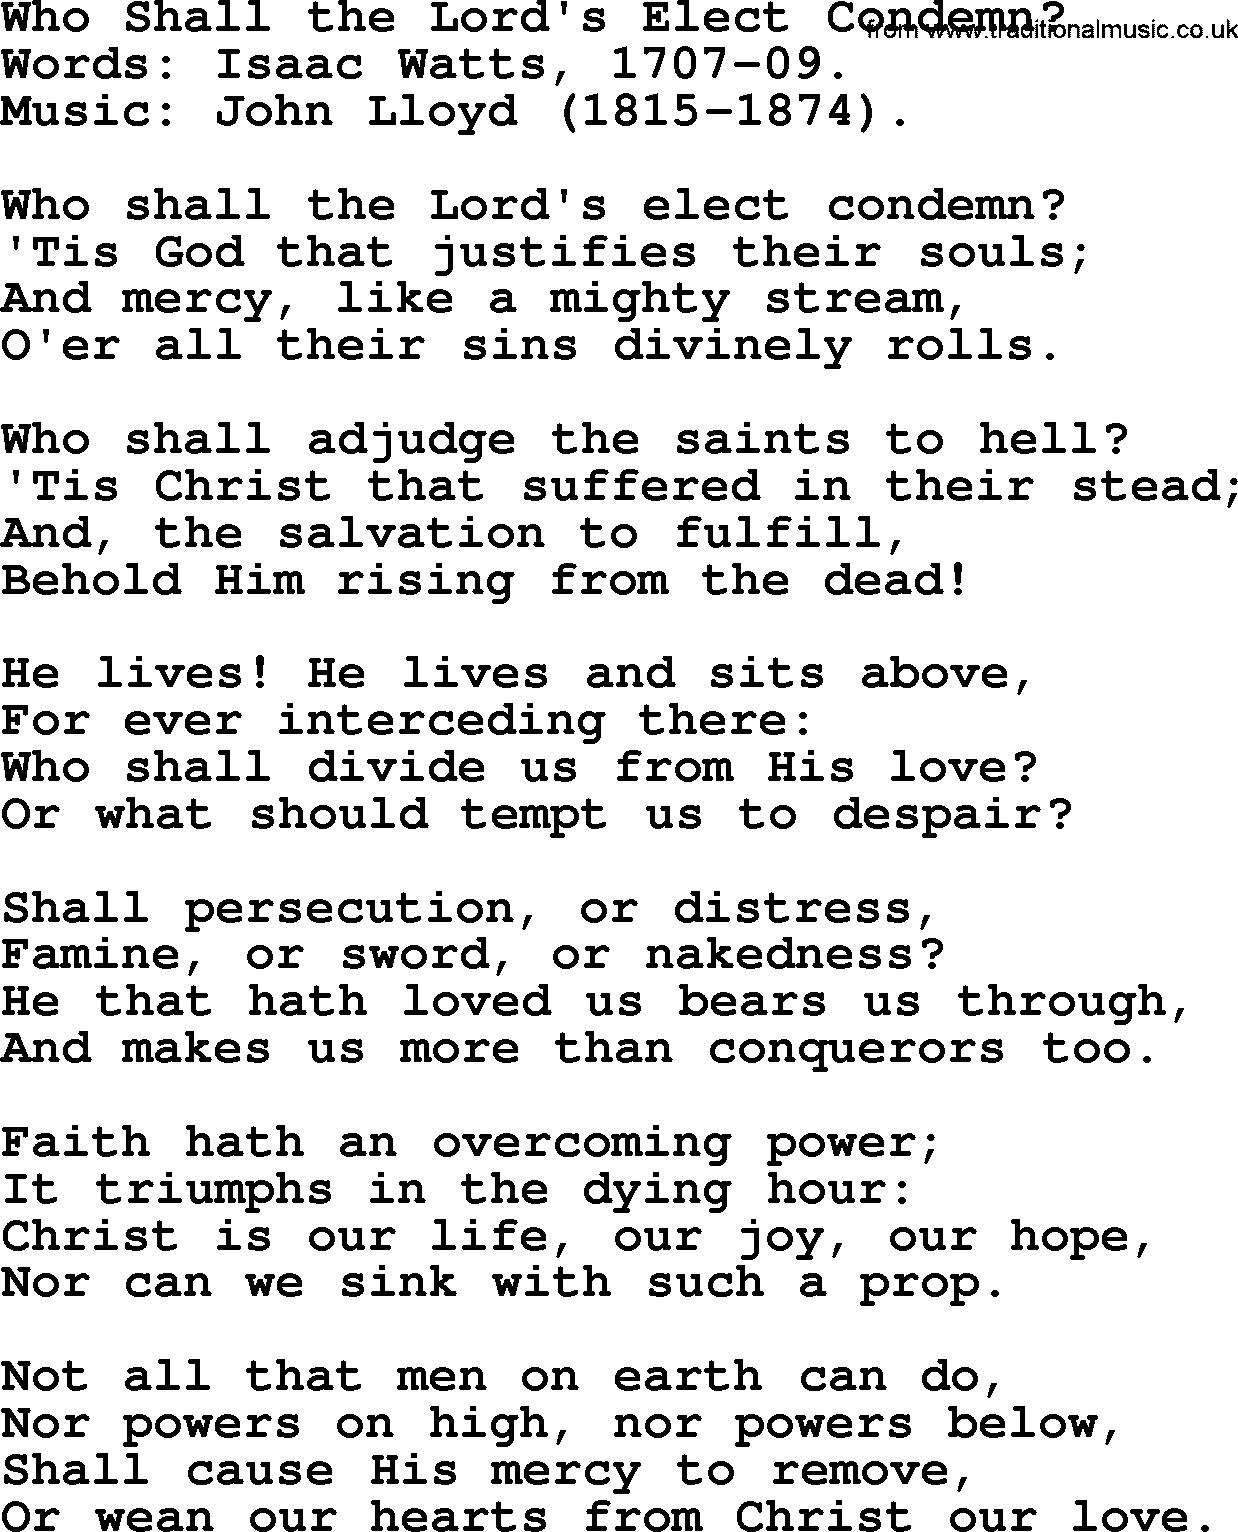 Isaac Watts Christian hymn: Who Shall the Lord's Elect Condemn_- lyricss